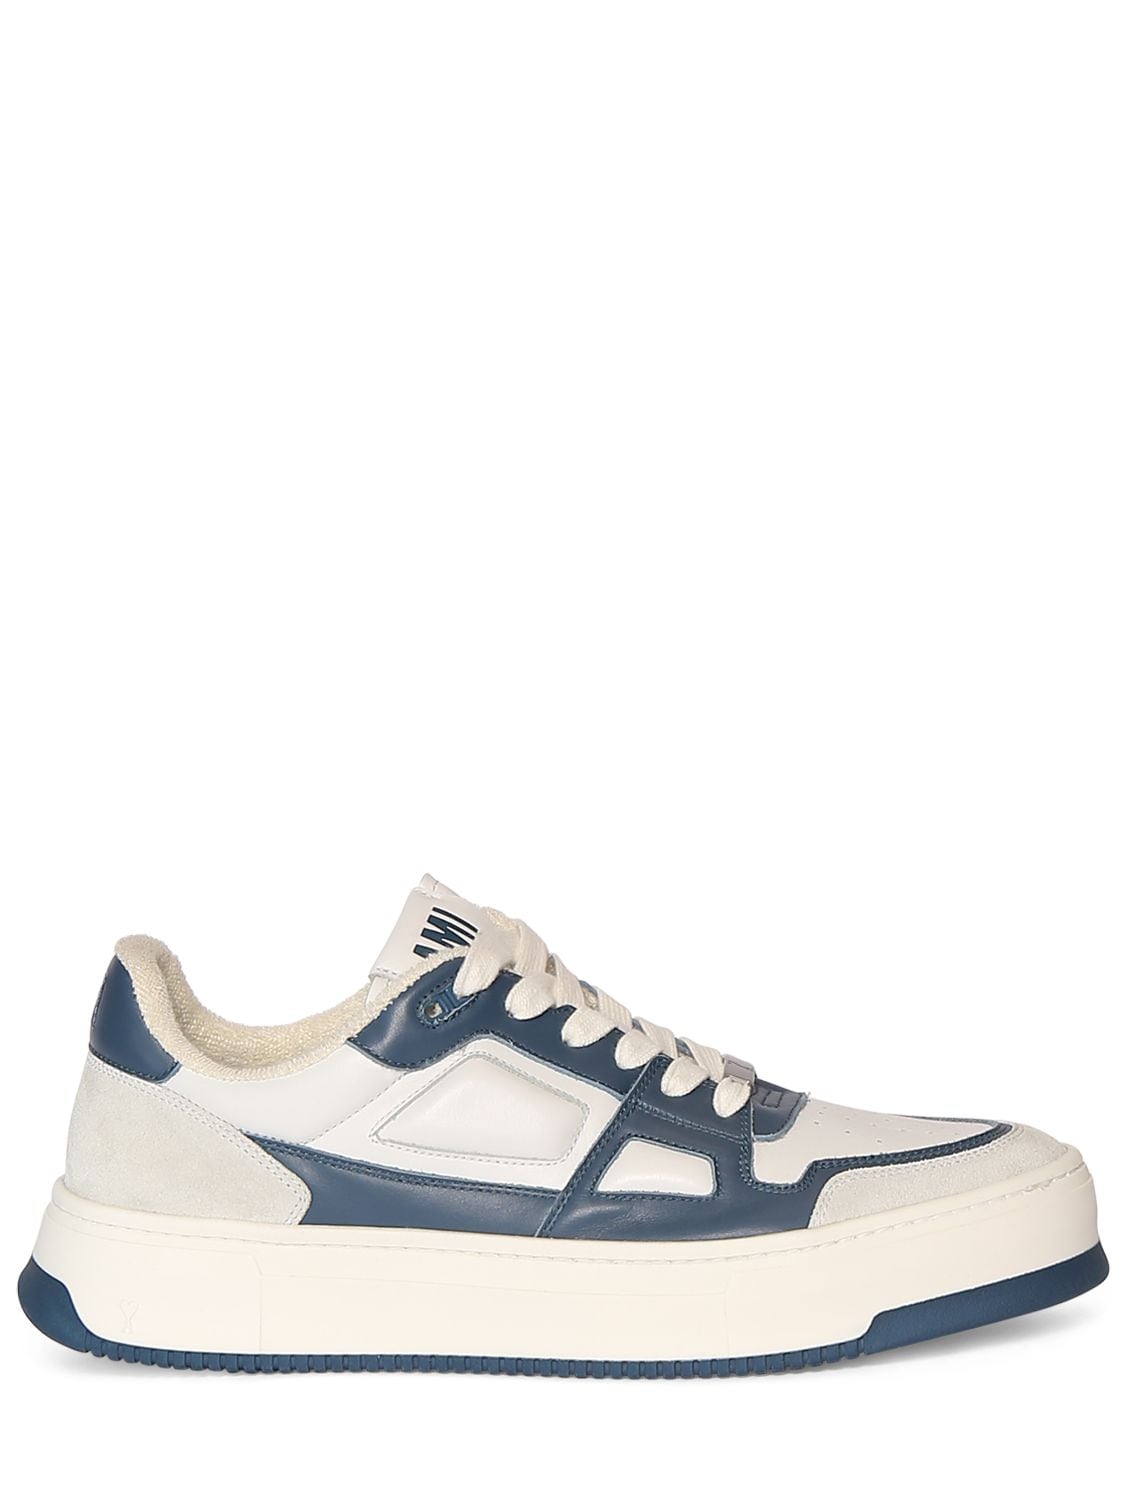 Ami Alexandre Mattiussi New Arcade Leather Low Top Sneakers In White,blue